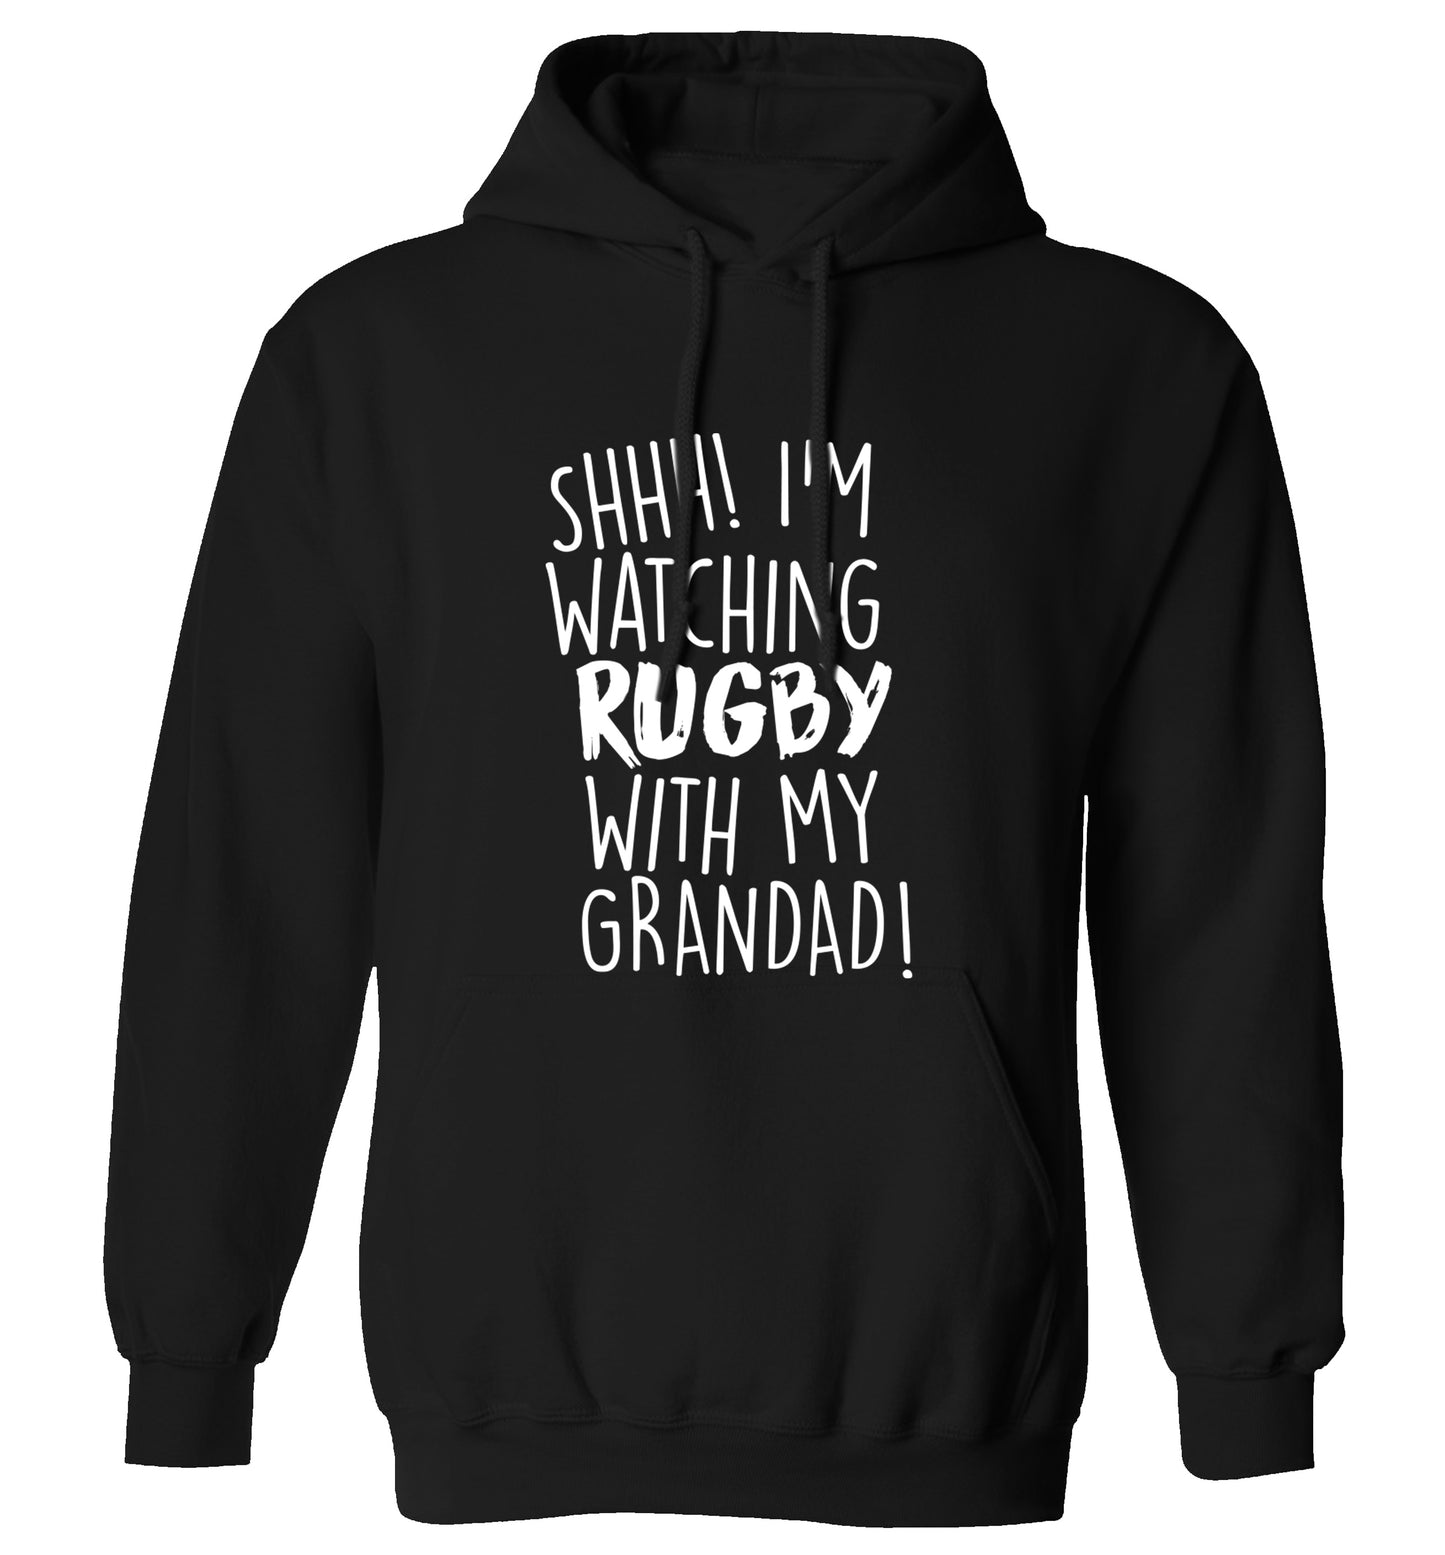 Shh I'm watching rugby with my grandad adults unisex black hoodie 2XL